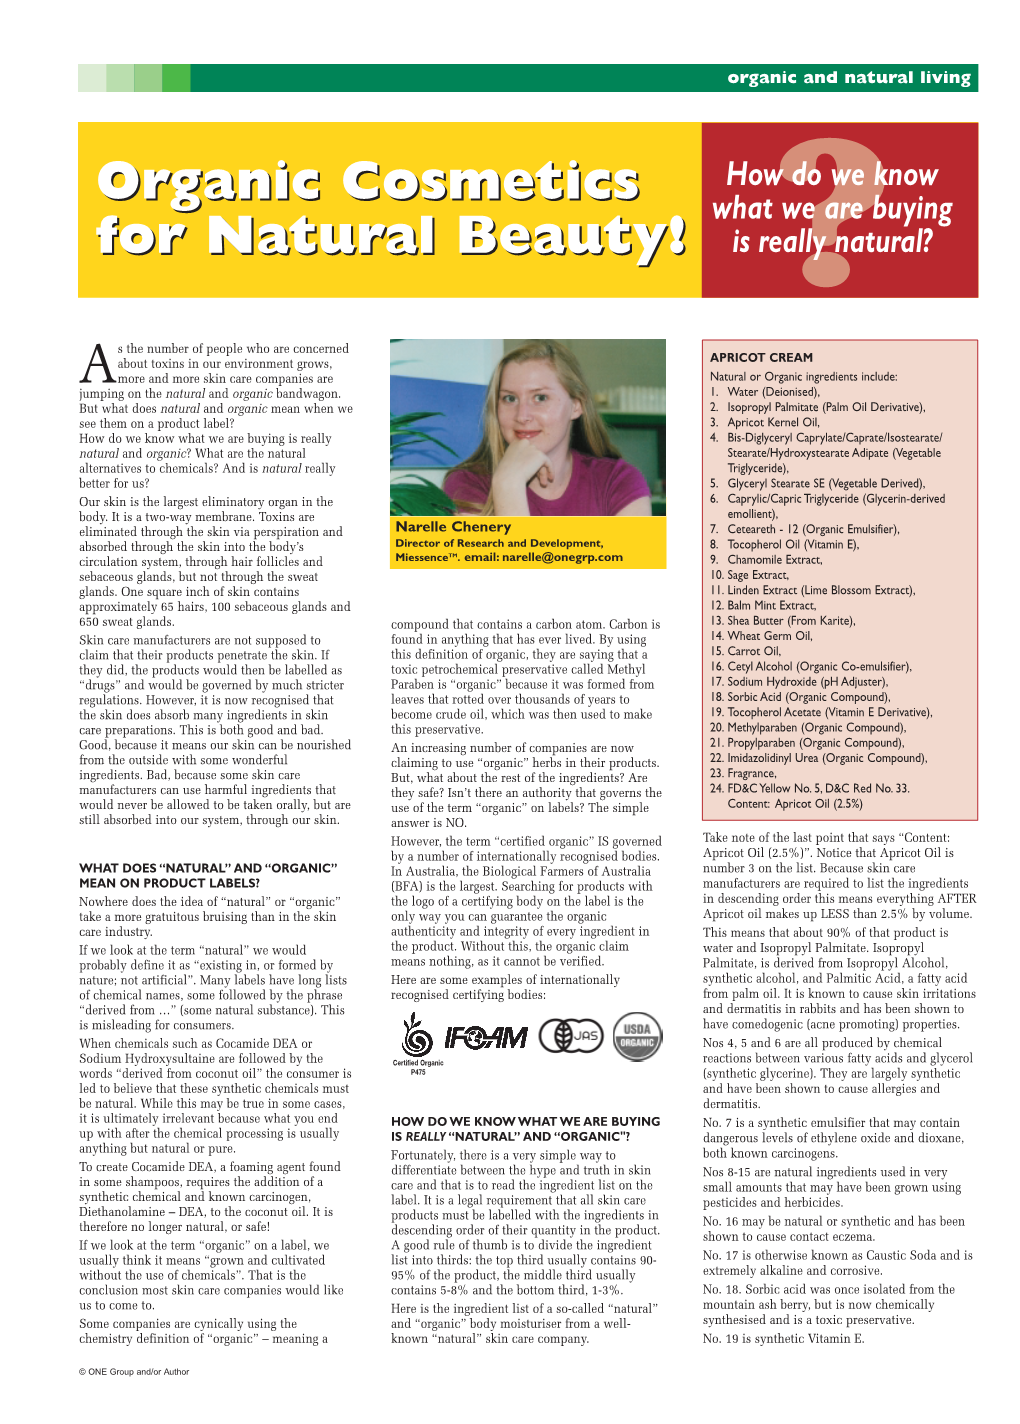 Organic Cosmetics for Natural Beauty!